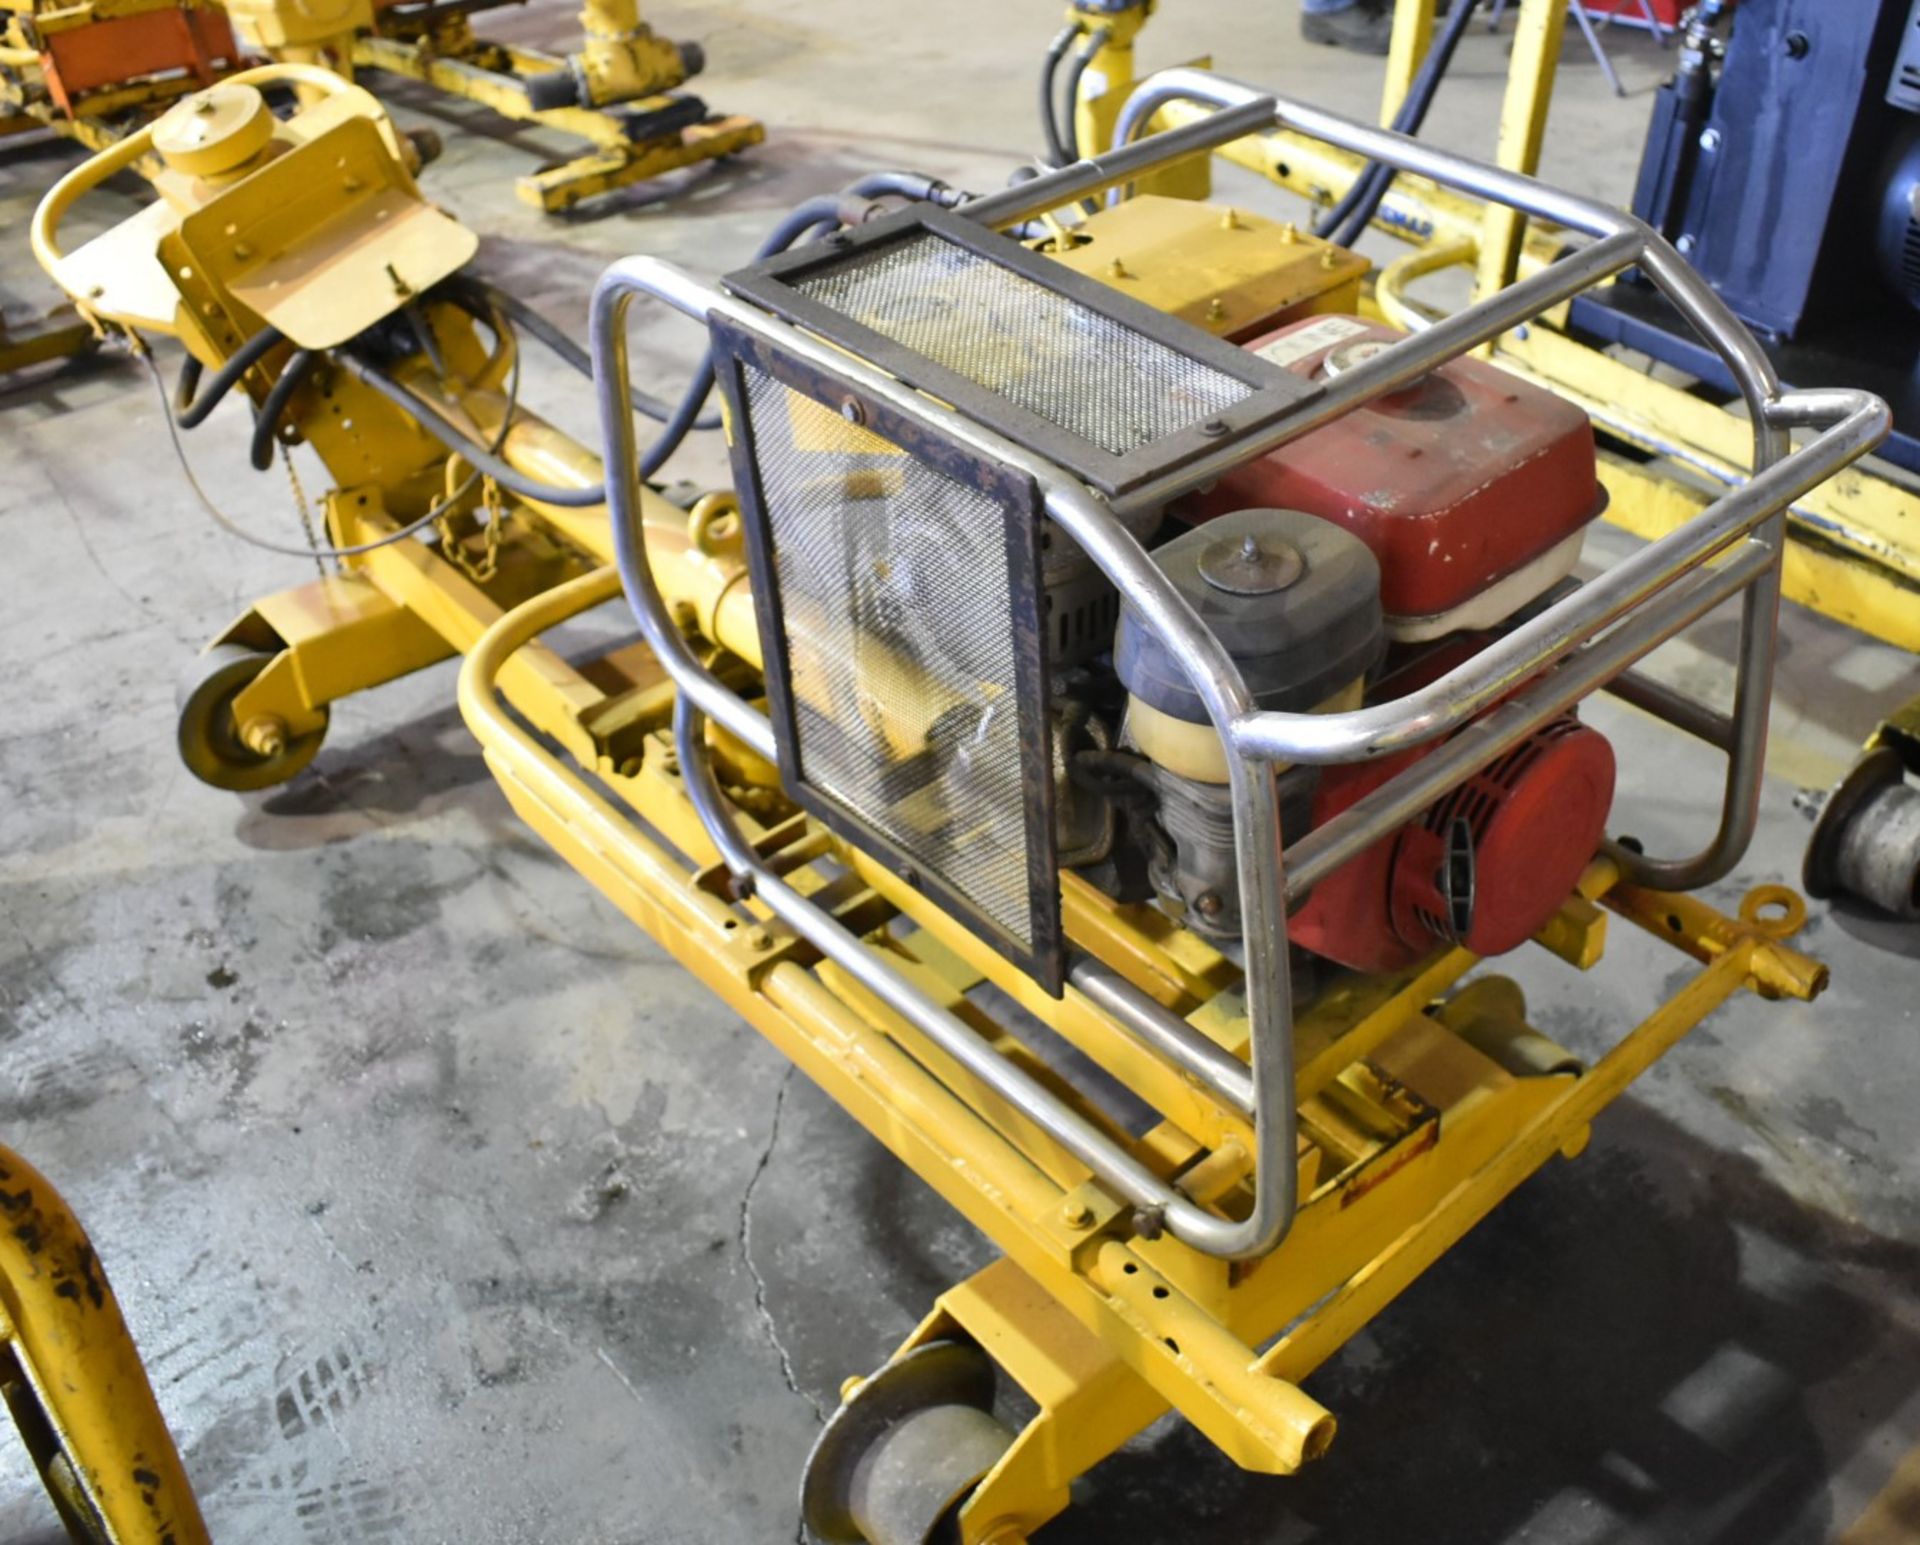 MFG N/A RAIL CART MOUNTED SPIKE DRIVER WITH HYDRAULIC POWER PACK, GAS ENGINE, HYDRAULIC PECKER S/ - Image 2 of 4